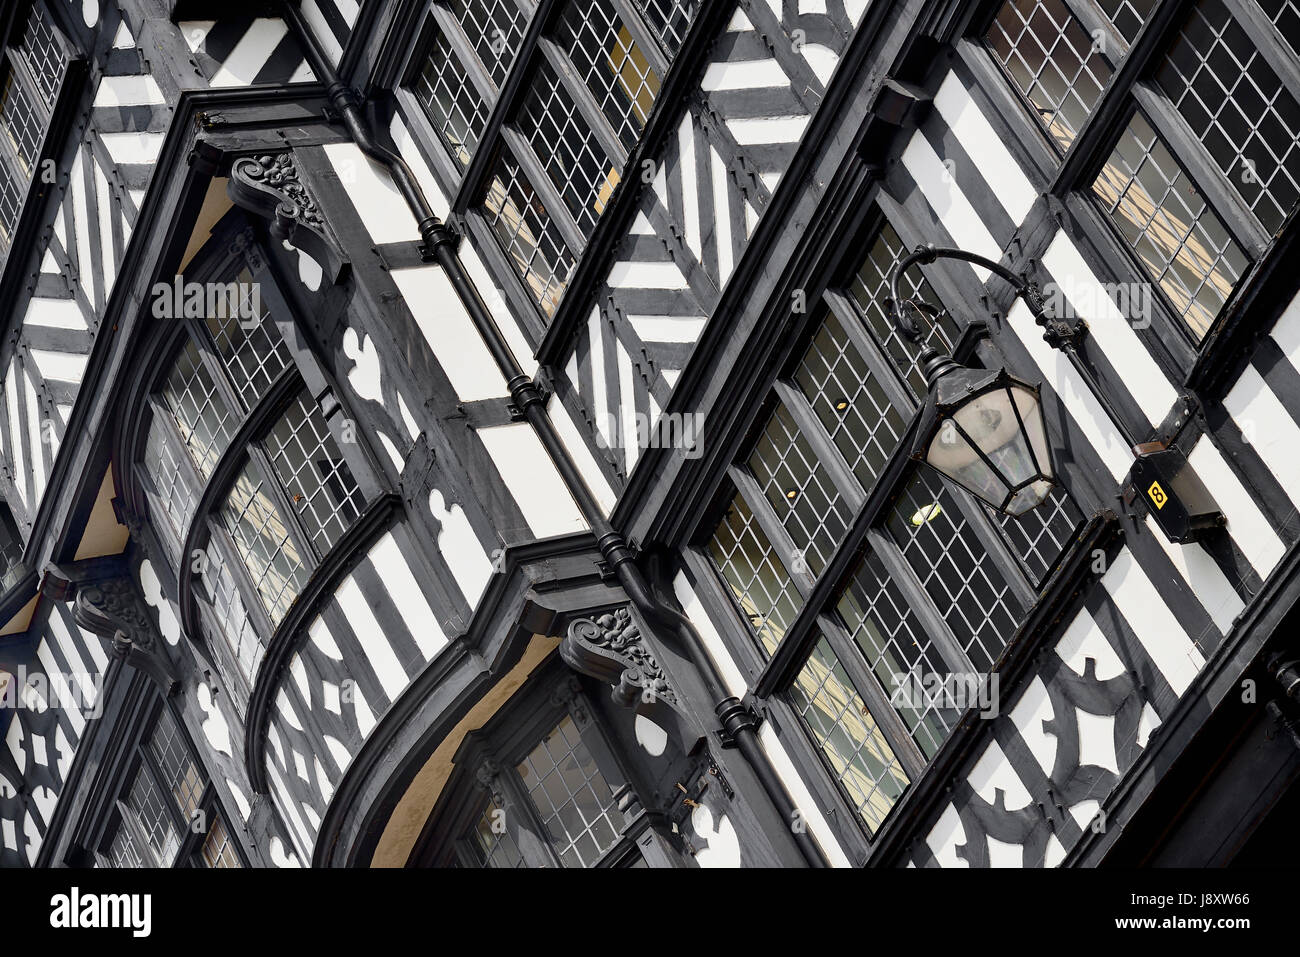 England, Cheshire, Chester, The Rows on Bridge Street, Black and White architectural patterns. Stock Photo